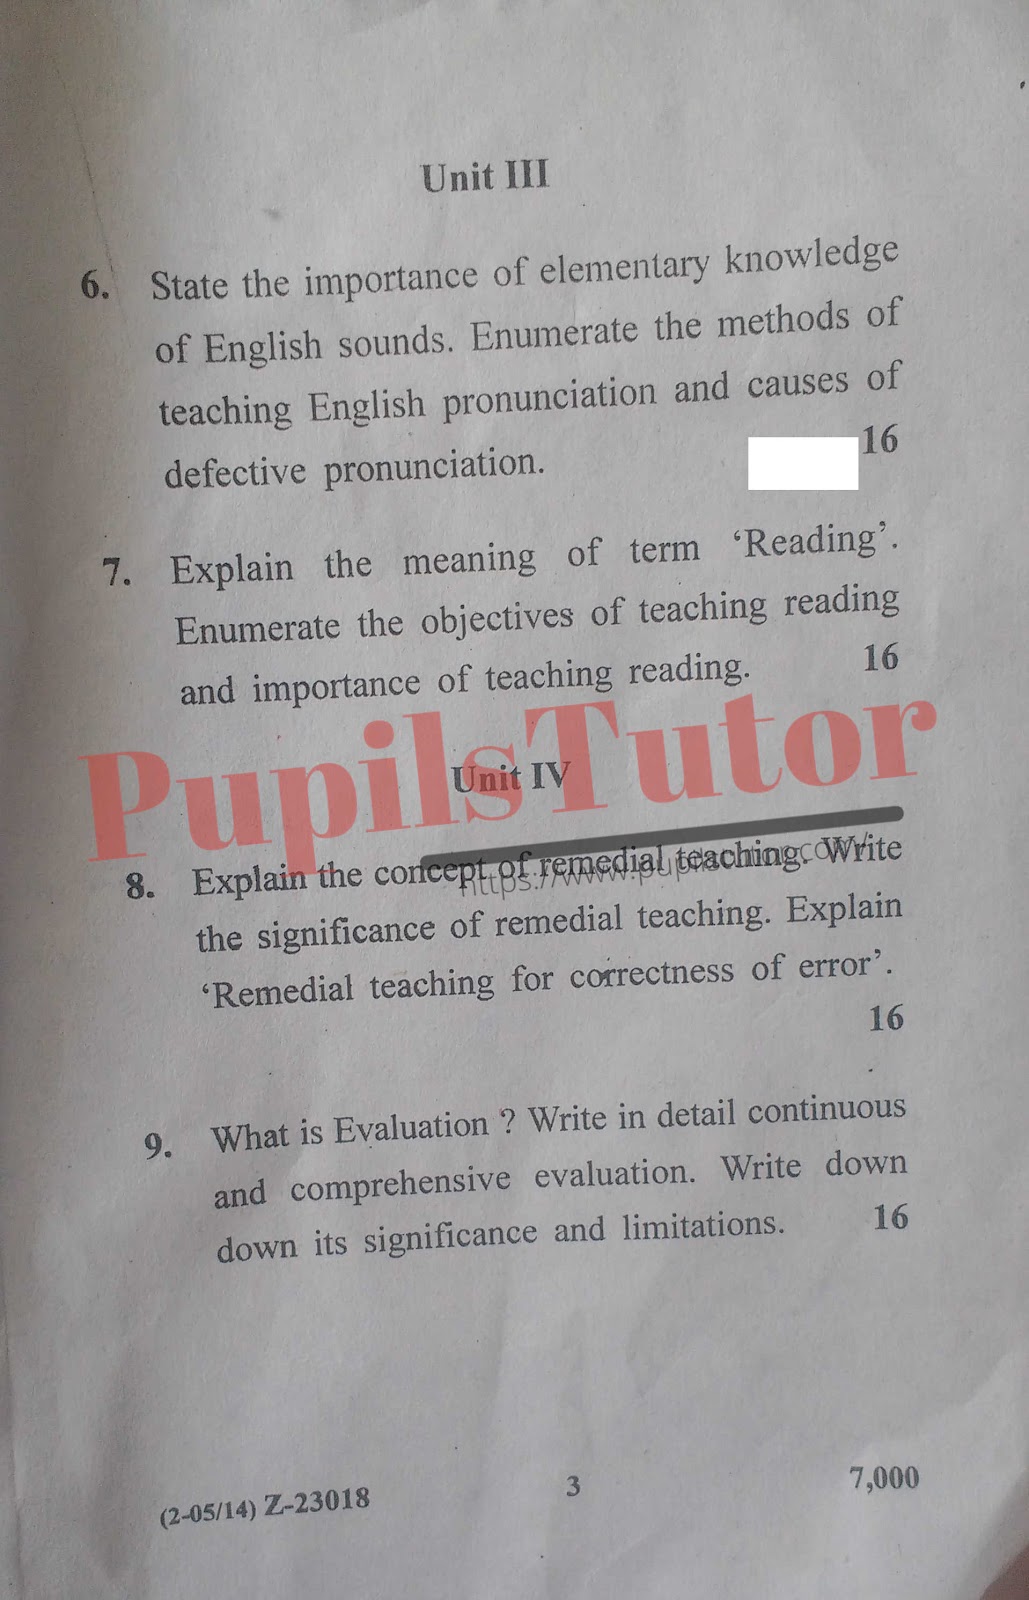 Free Download PDF Of M.D. University B.Ed First Year Latest Question Paper For Pedagogy Of English Subject (Page 3) - https://www.pupilstutor.com